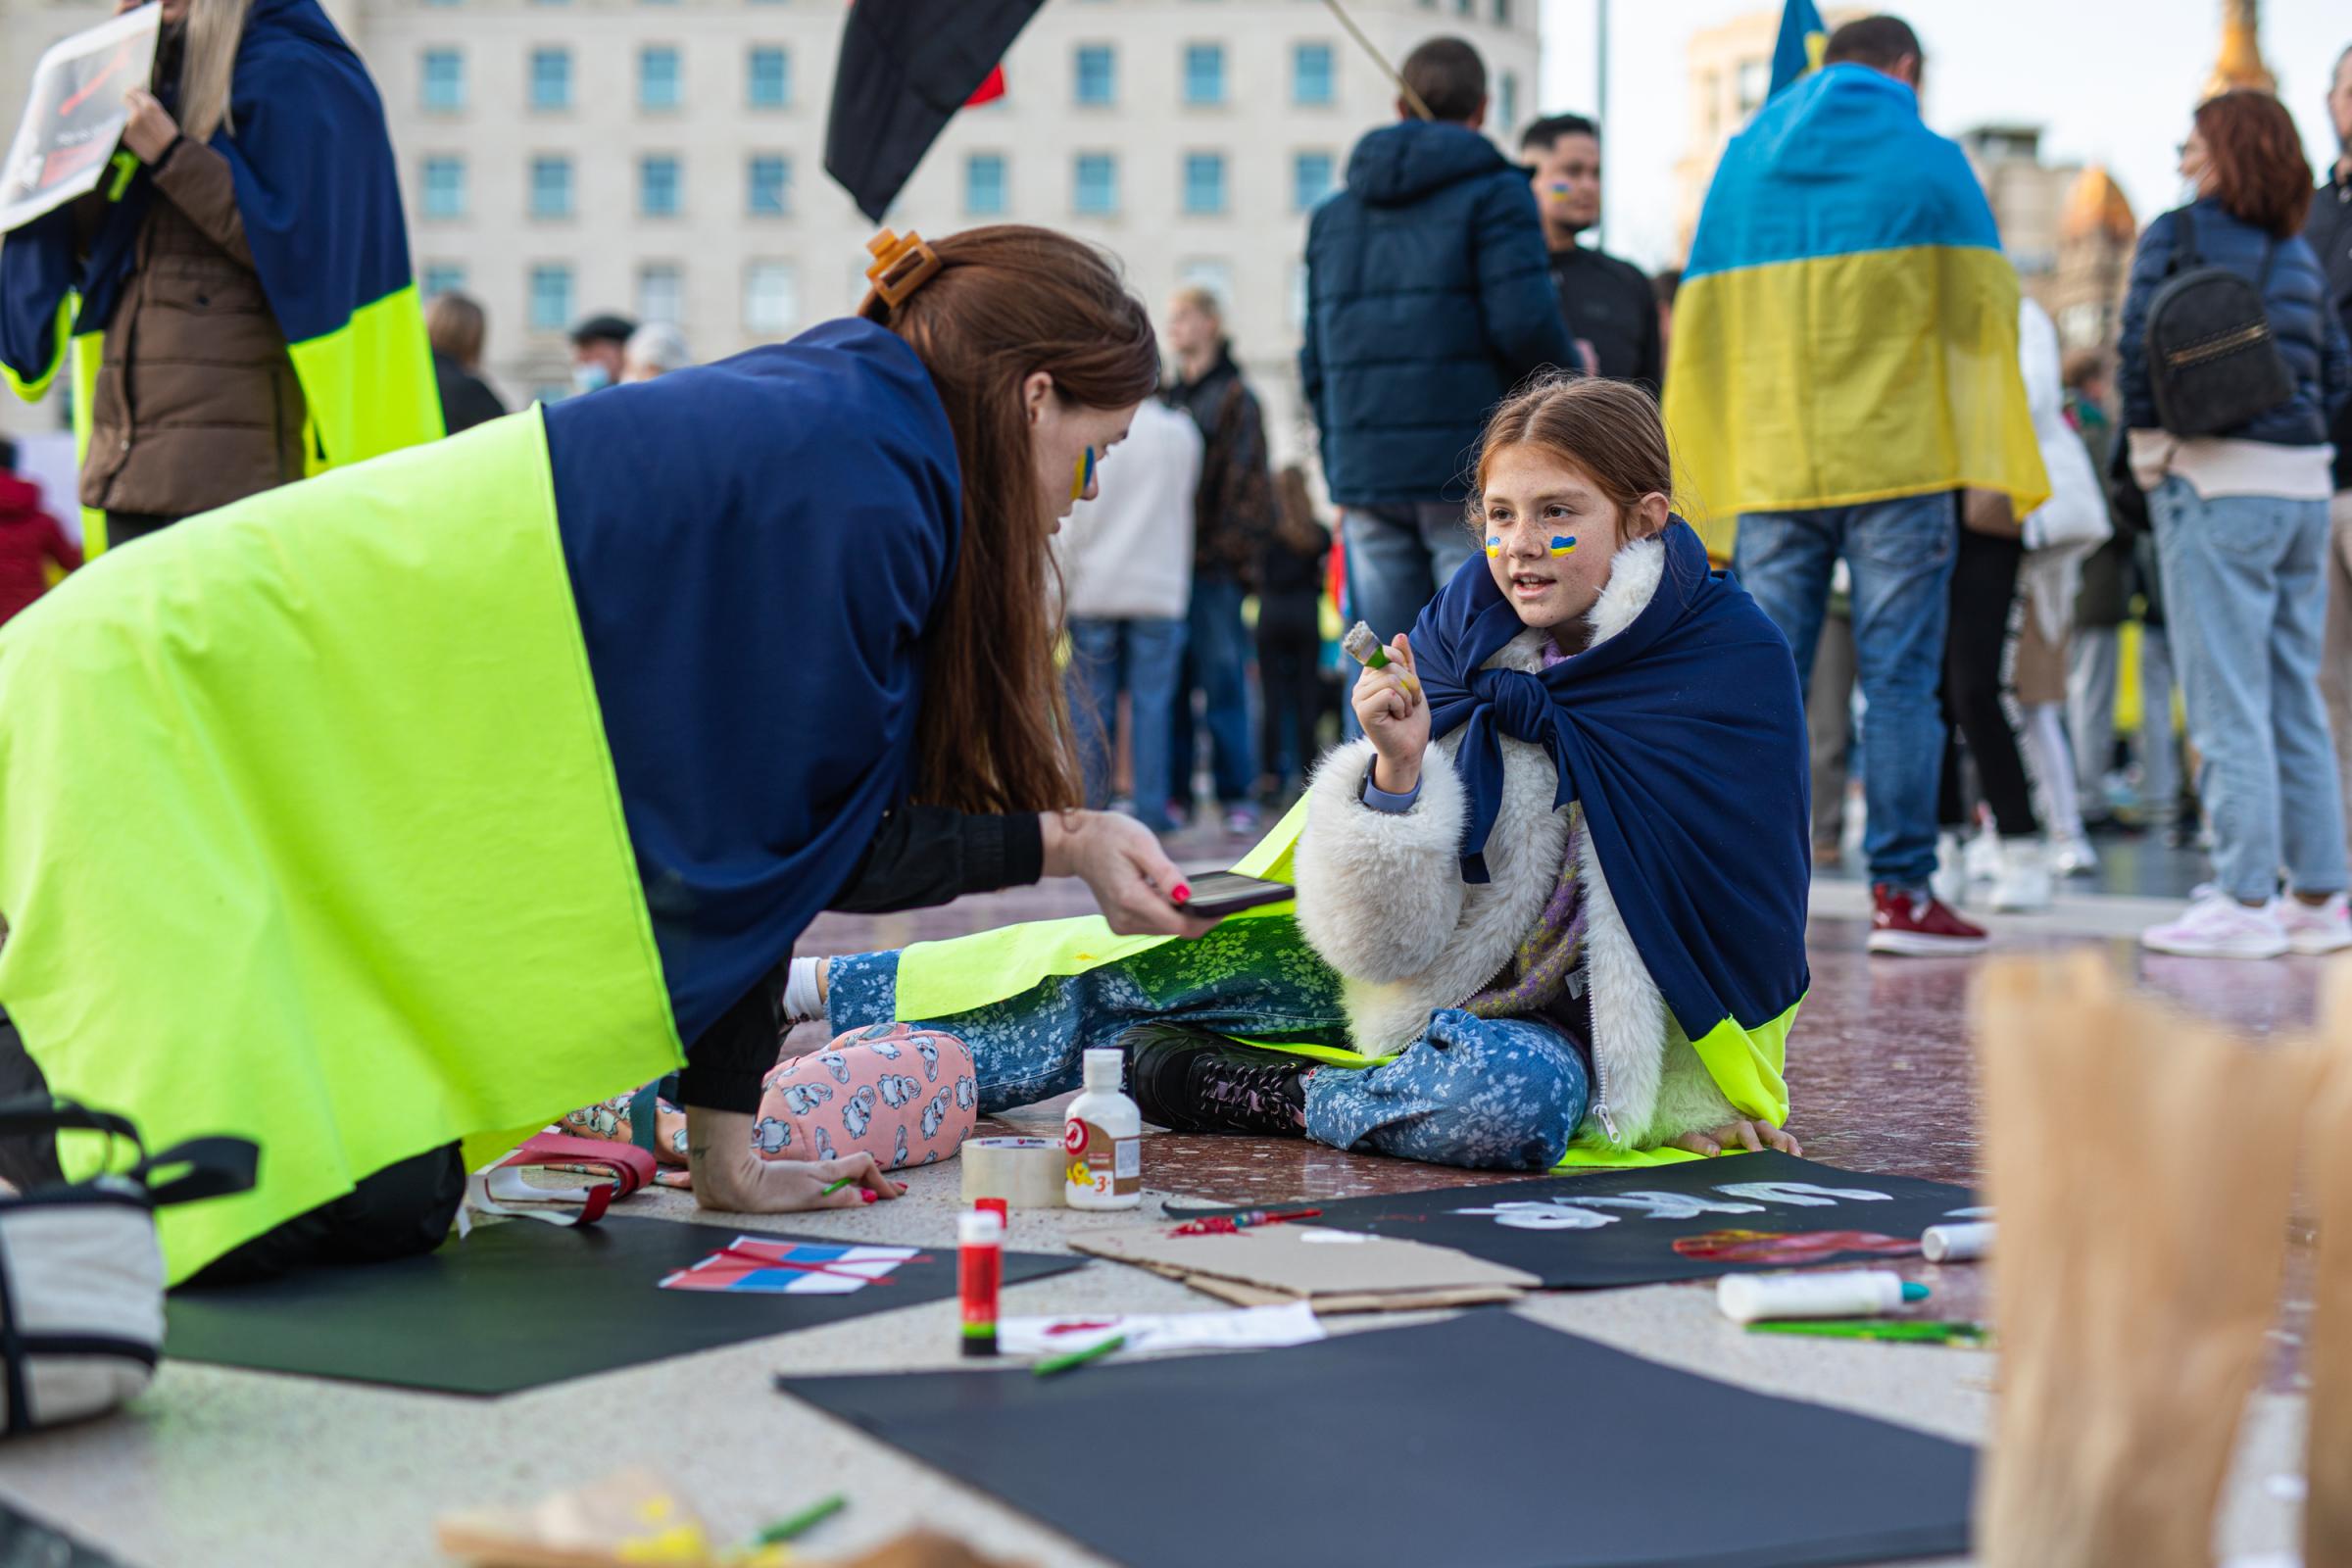 Protestors In Spain Rally For Ukraine After Russian Invasion - BARCELONA, SPAIN - FEBRUARY 27: Two young men paint and...